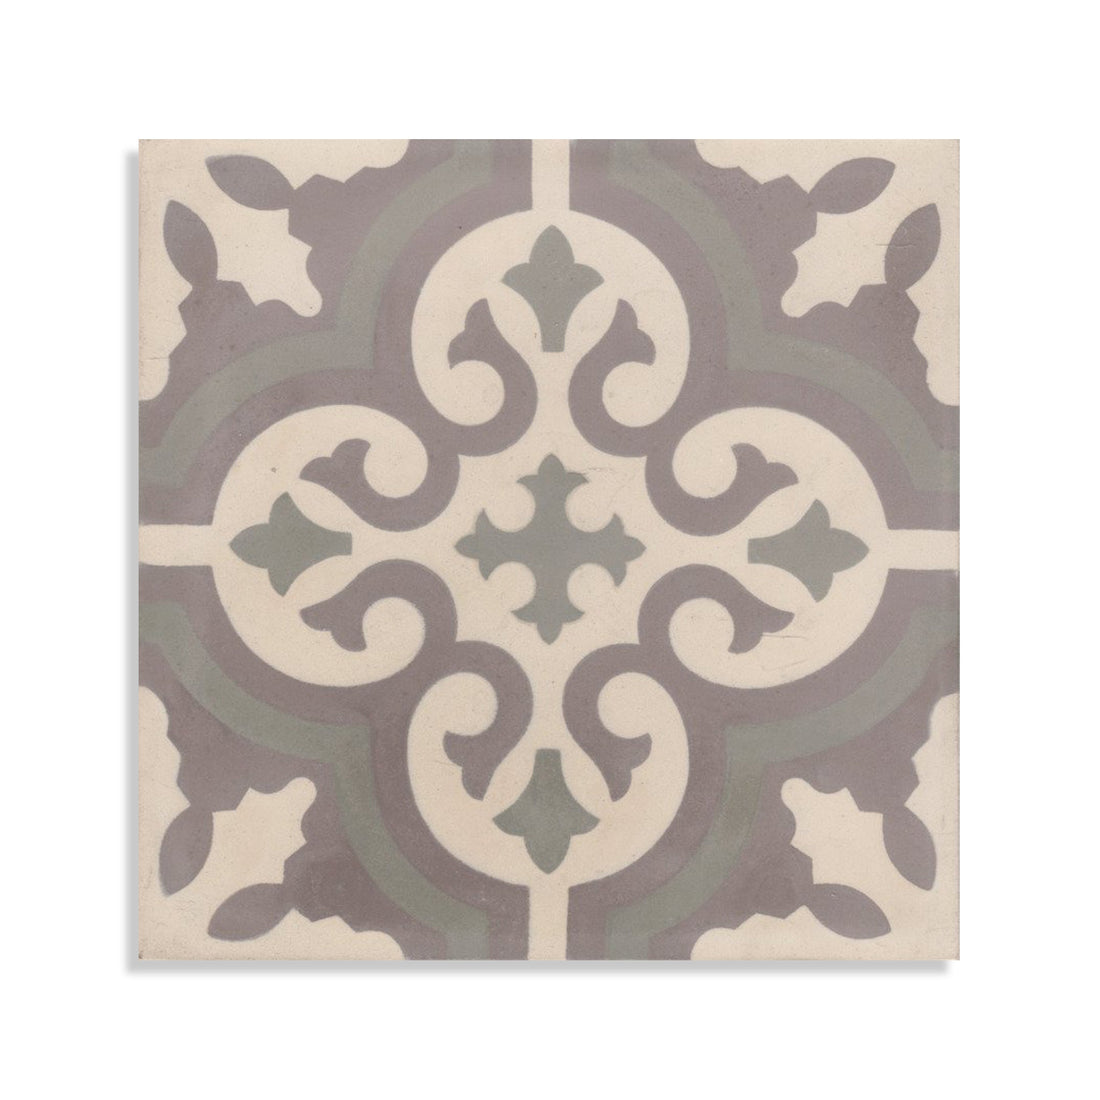 Moroccan Encaustic Cement Pattern gr06a, 20 x 20cm - Tiles &amp; Stone To You